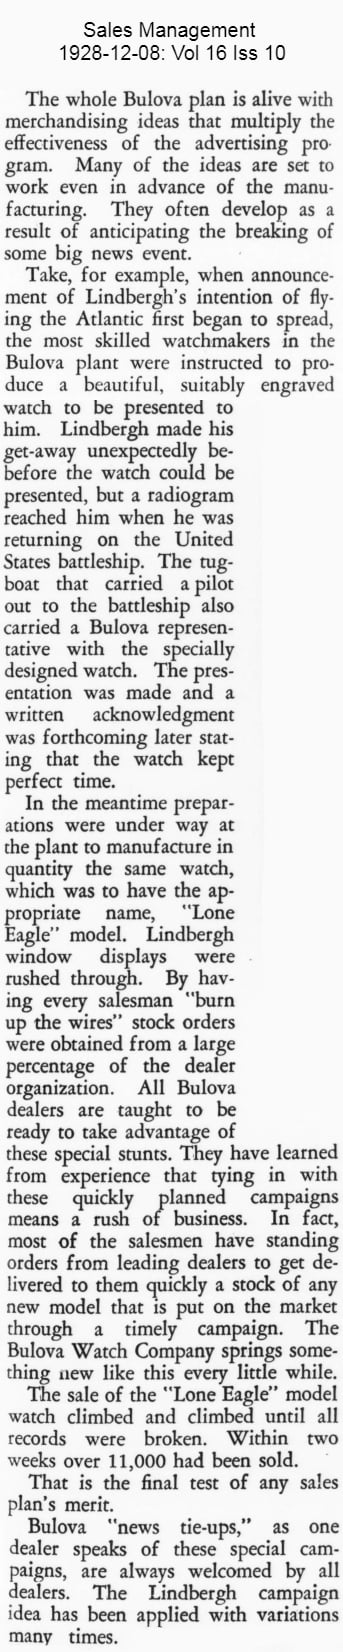 1928-12-08 Origins of gthe Lone Eagle watch